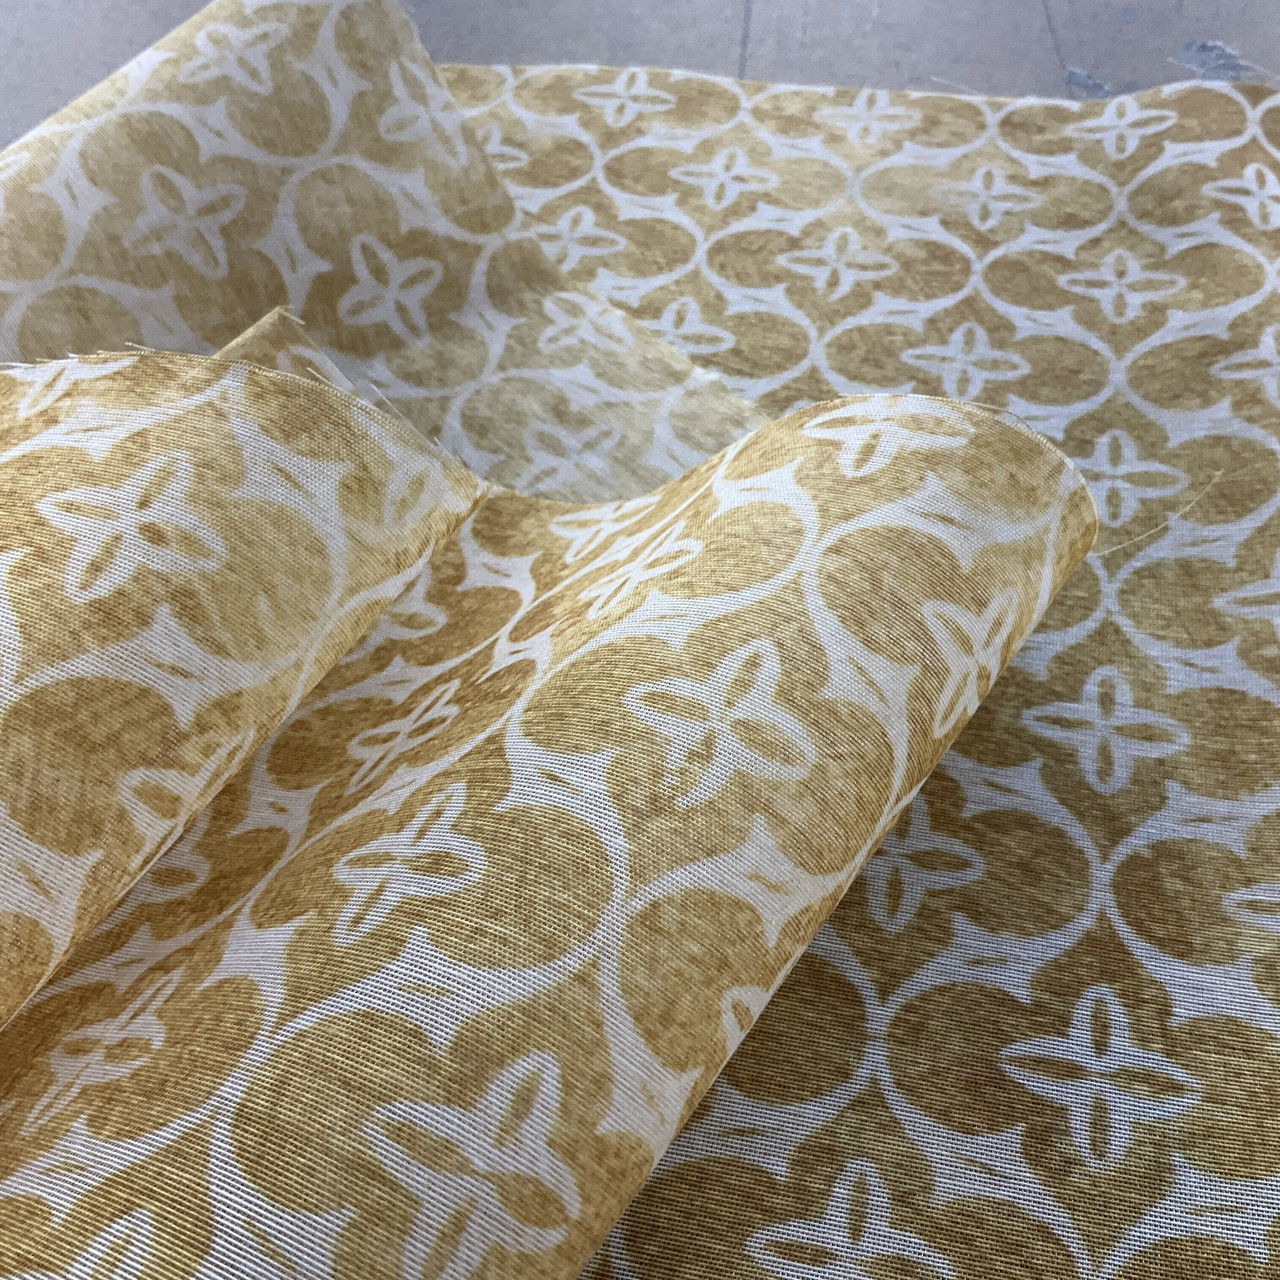 All About Ticking - What is Ticking Fabric? – Martha's Furnishing Fabrics